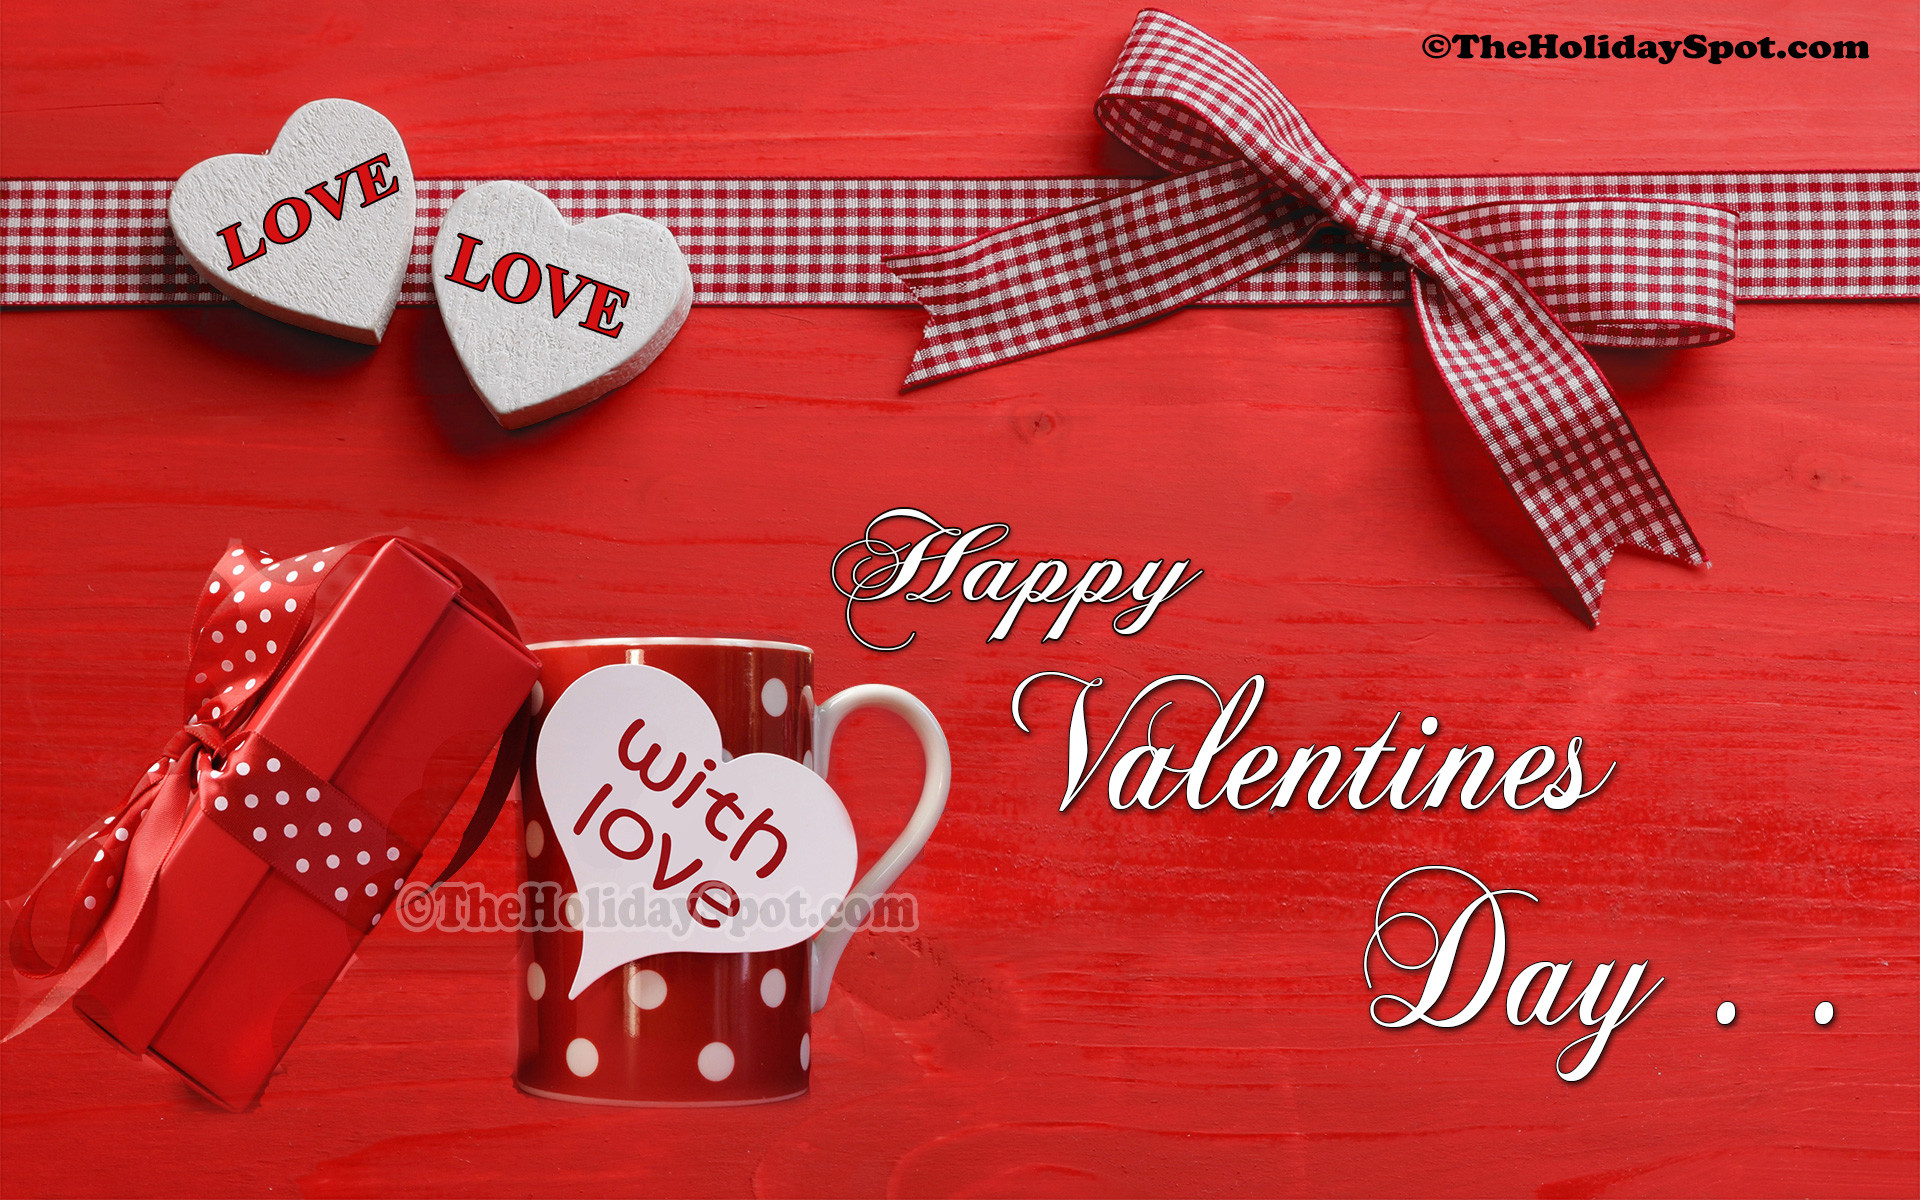 1920x1200 0 77 Valentines Day Wallpapers 77 Valentines Day Wallpapers